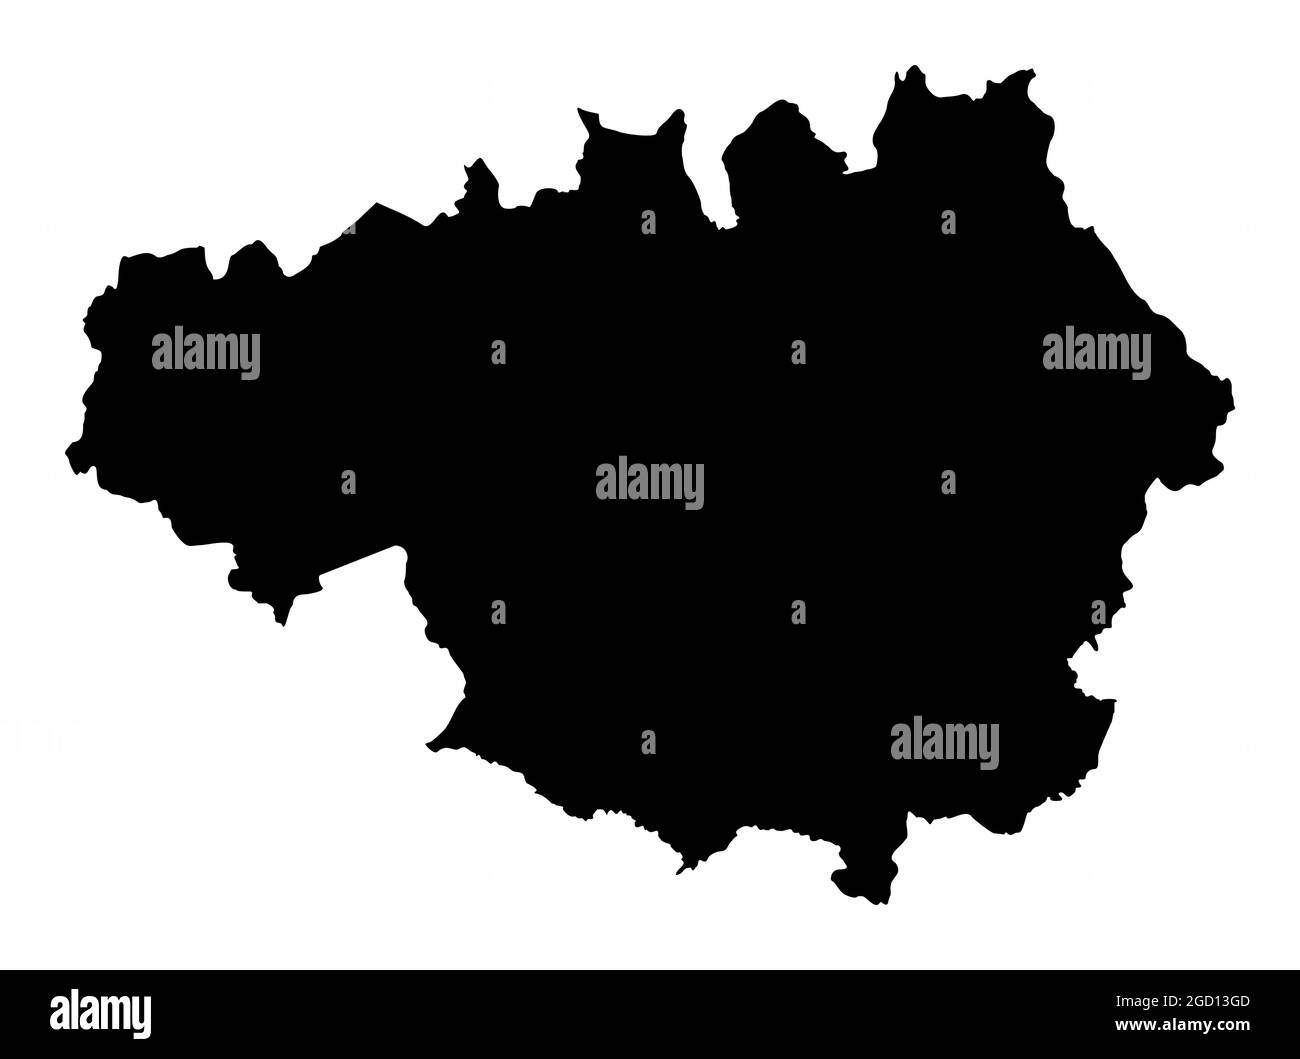 Greater manchester map Black and White Stock Photos & Images - Alamy